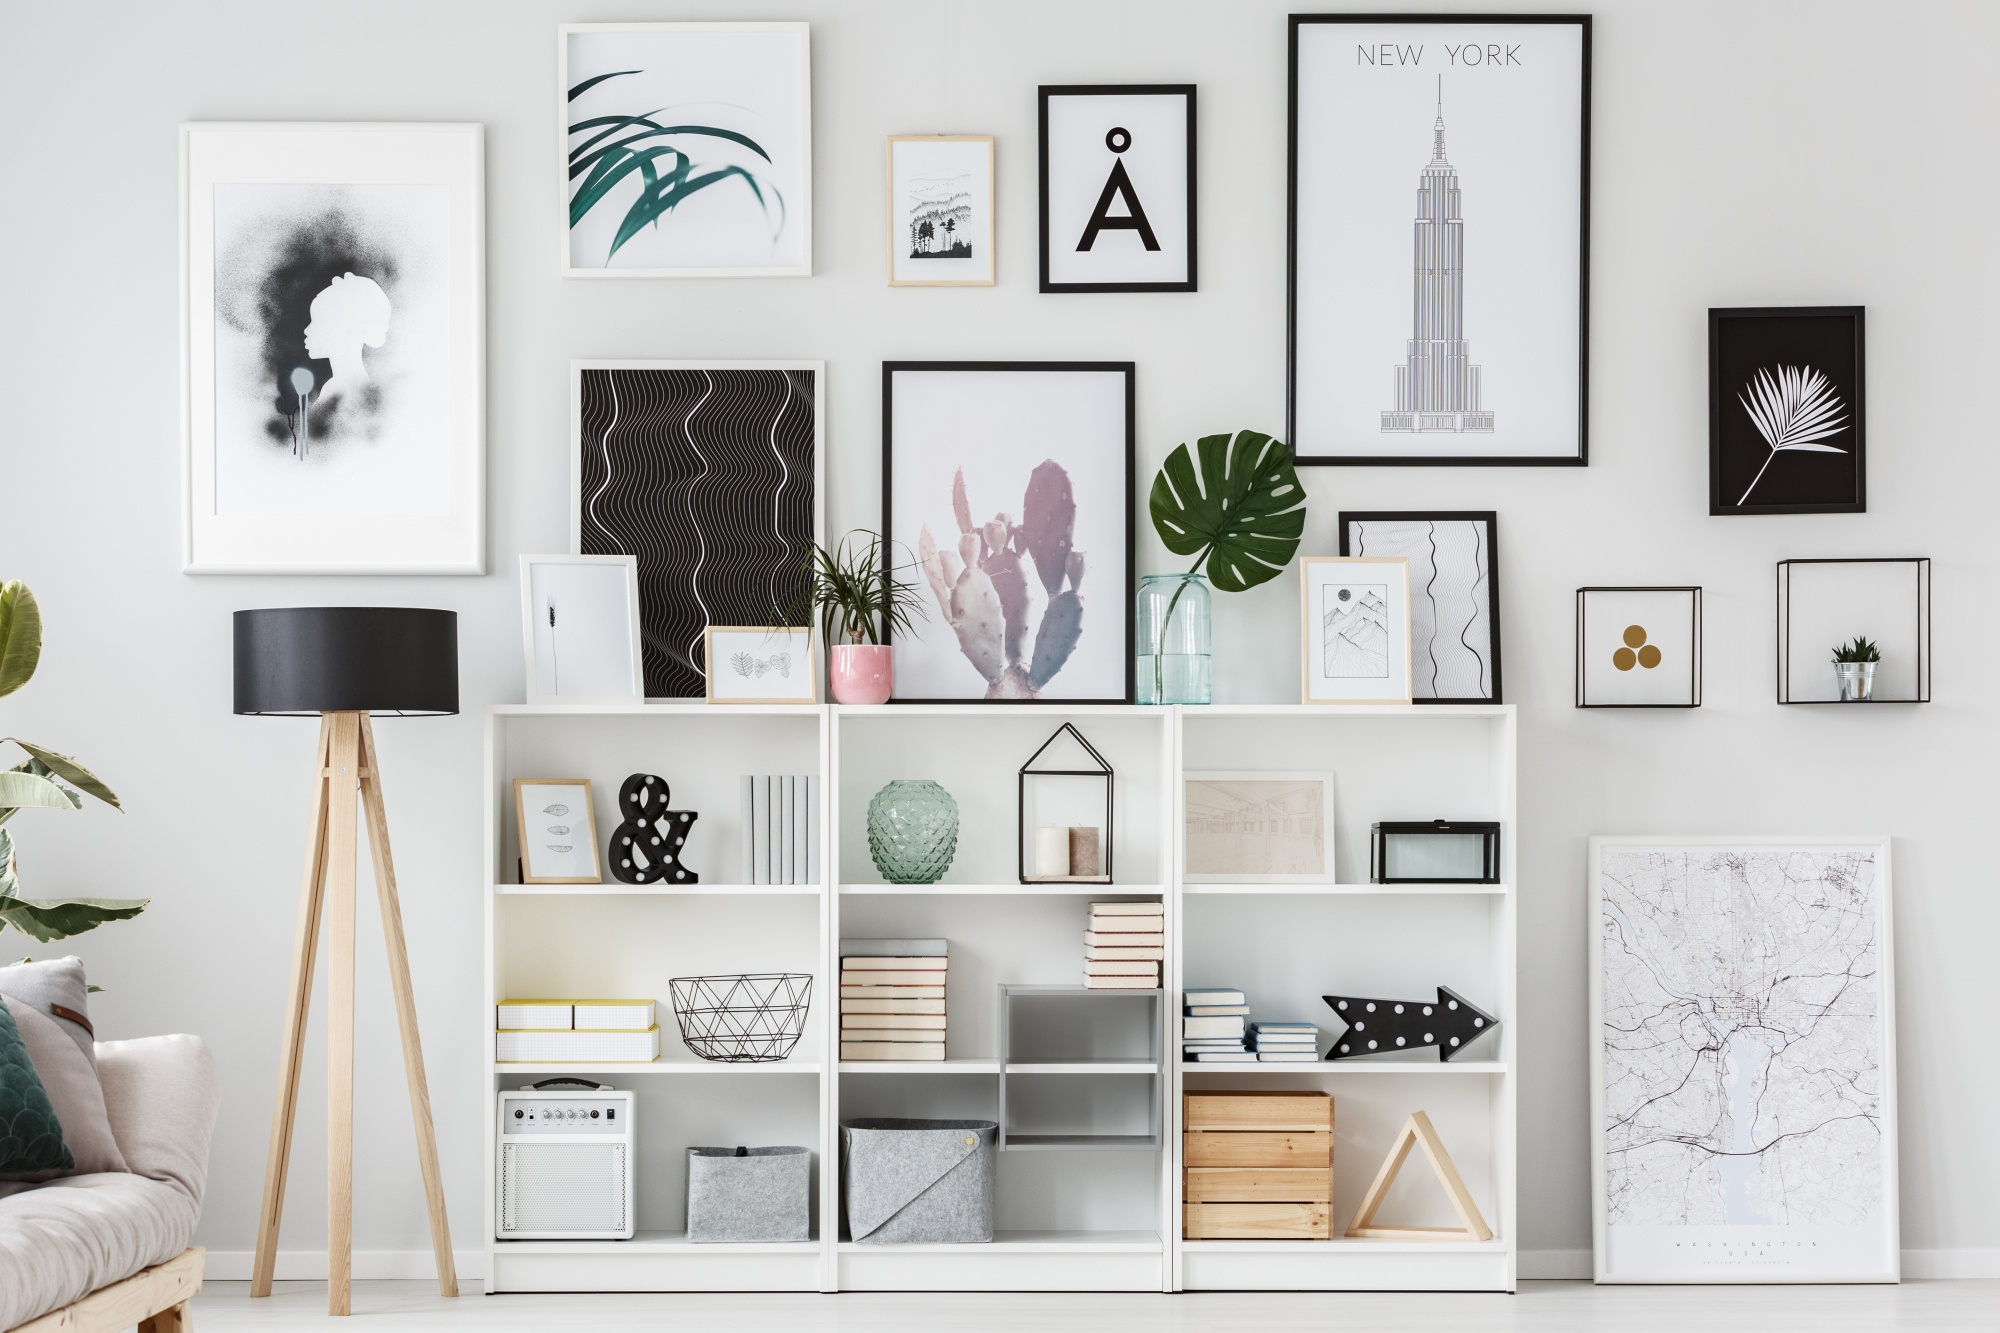 5 Easy Steps To The Perfect and Unique Gallery Wall with a black and white and floral theme showing pieces leaning up against shelves and propped on the floor for a full ceiling to floor look which includes white shelving